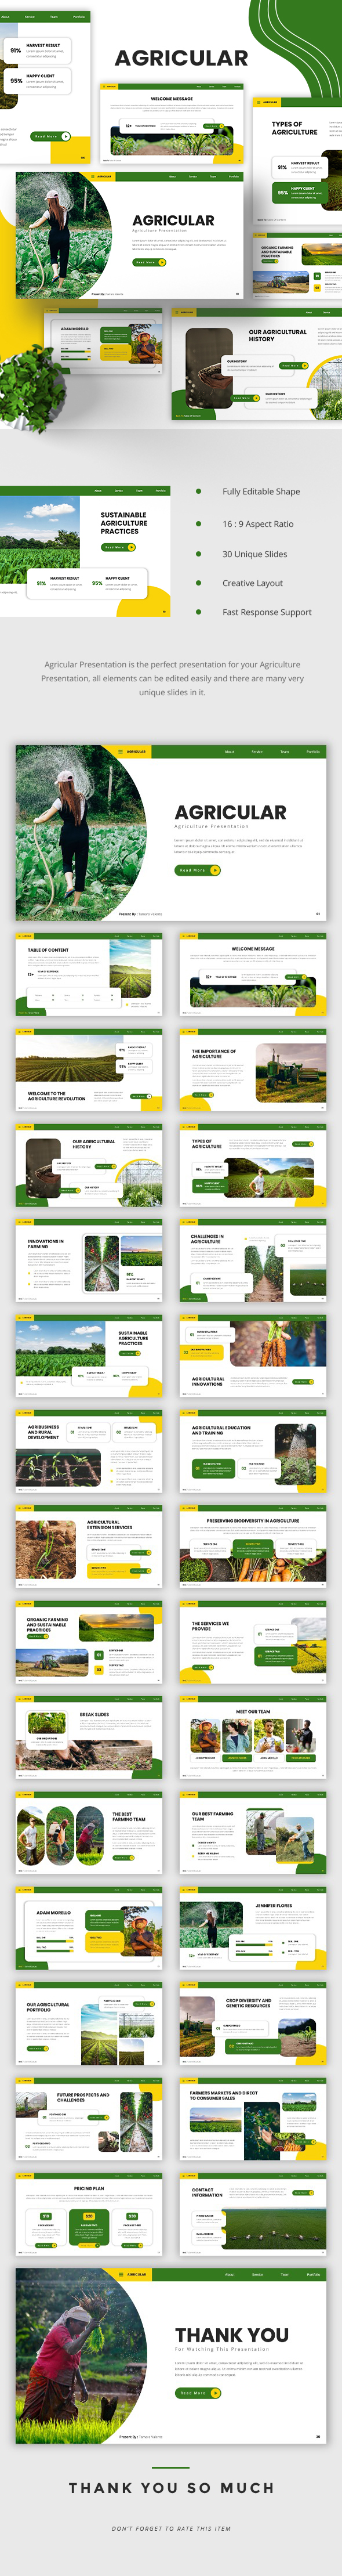 Agricular - Agriculture PowerPoint